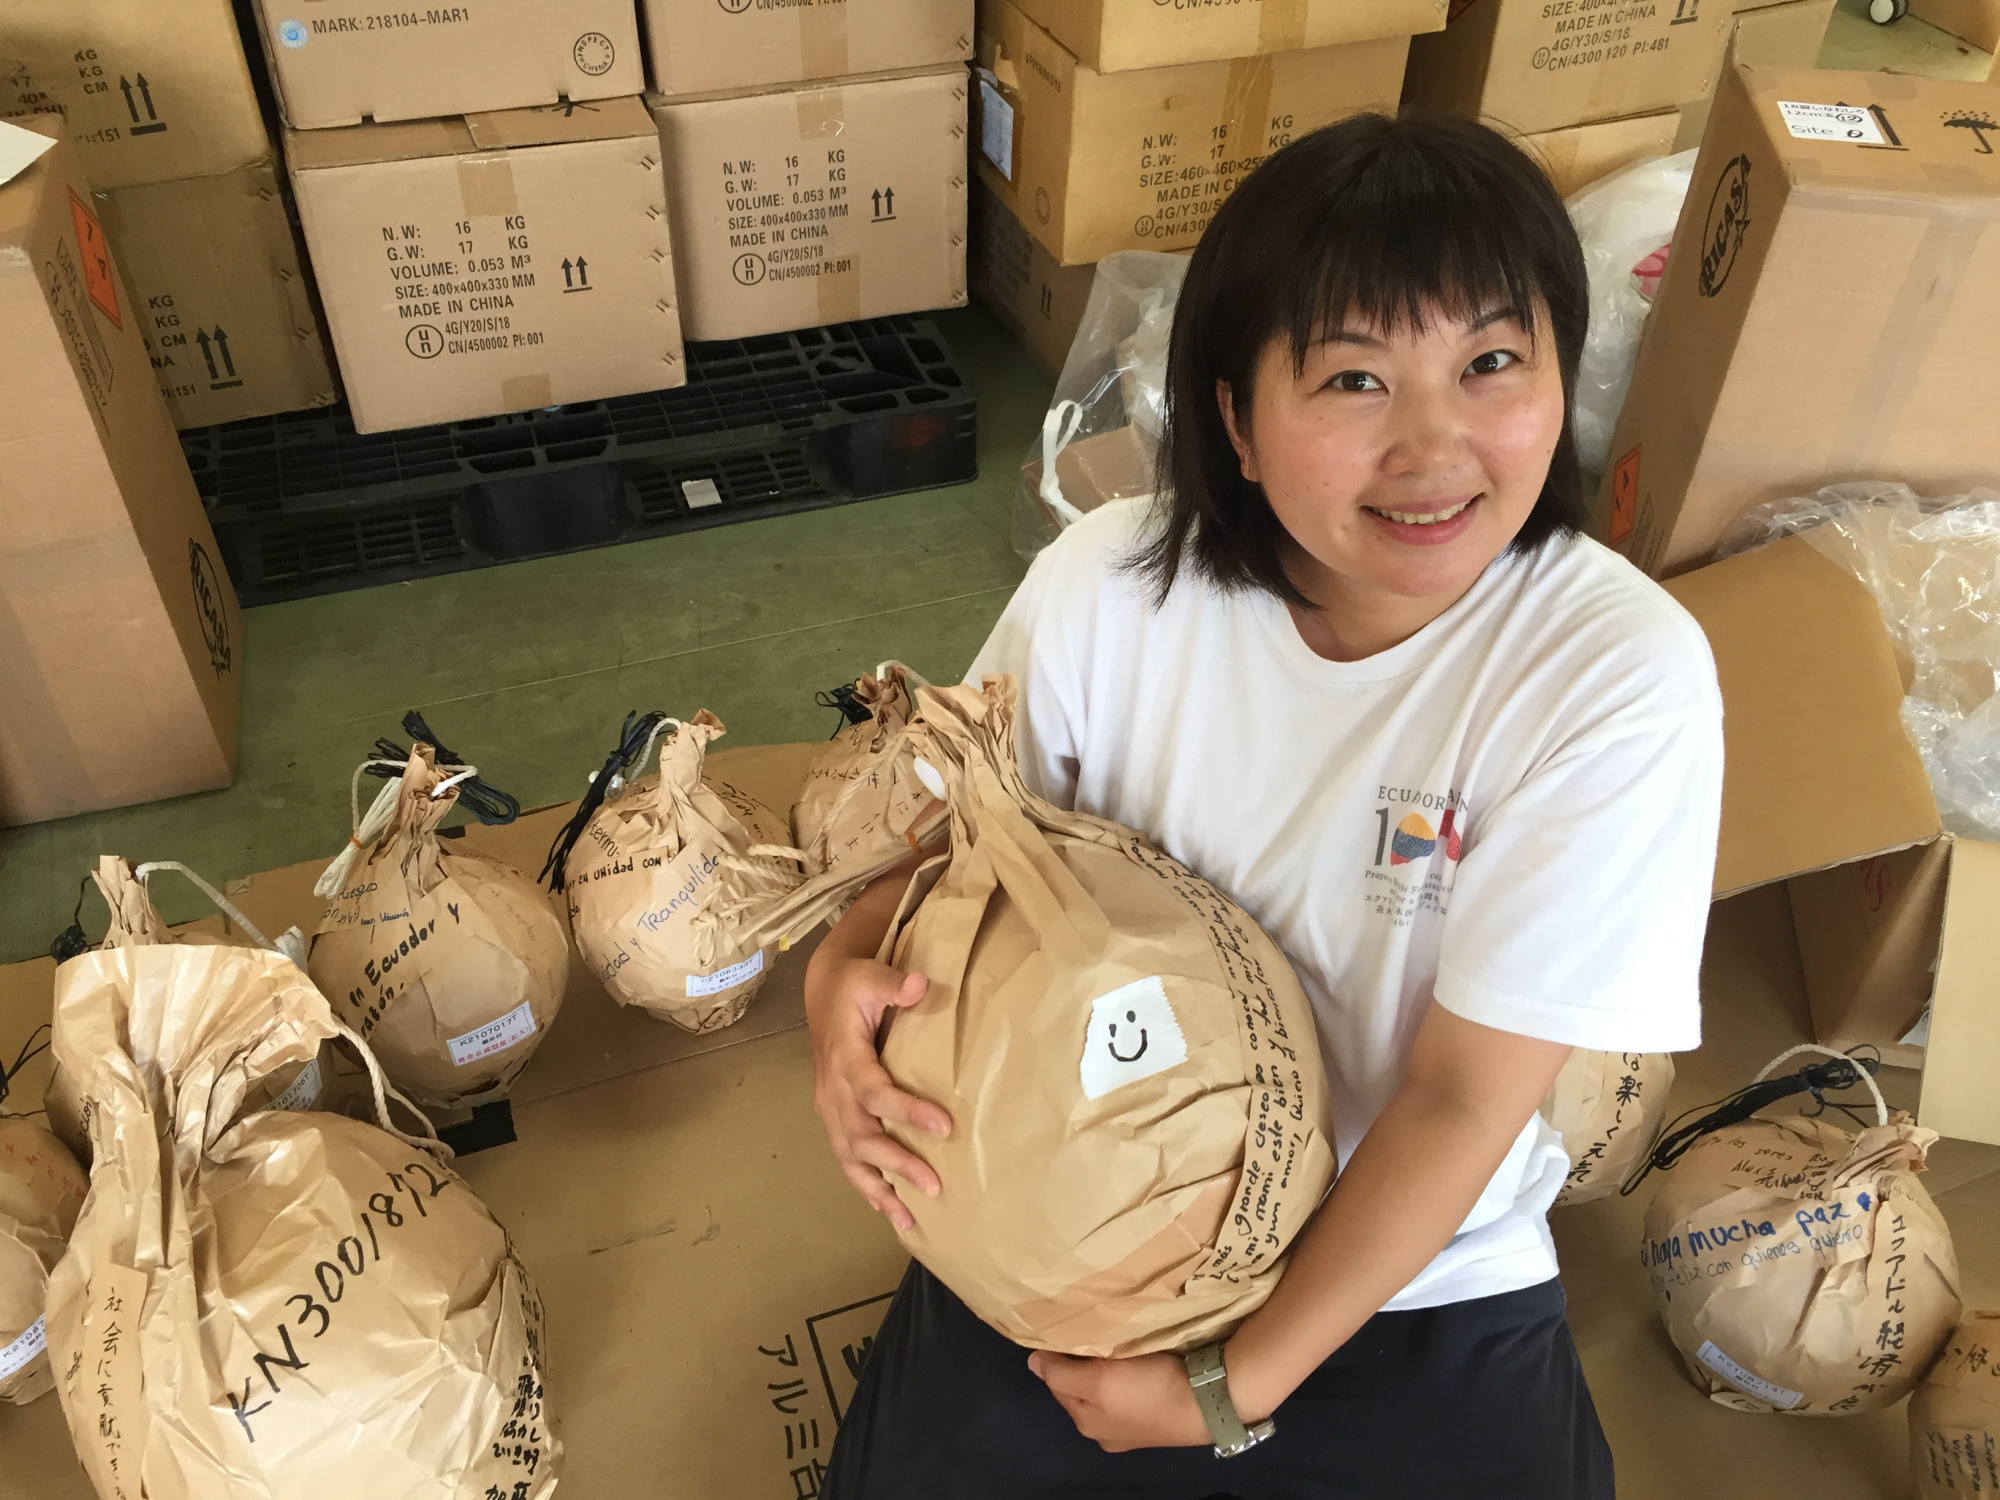 Ayumi Miyaura, who launched a fireworks show linking Ecuador to a Fukushima town in August, holds shell casings with wishes wrapped around them in this undated photo. | COURTESY OF AYUMI MIYAURA